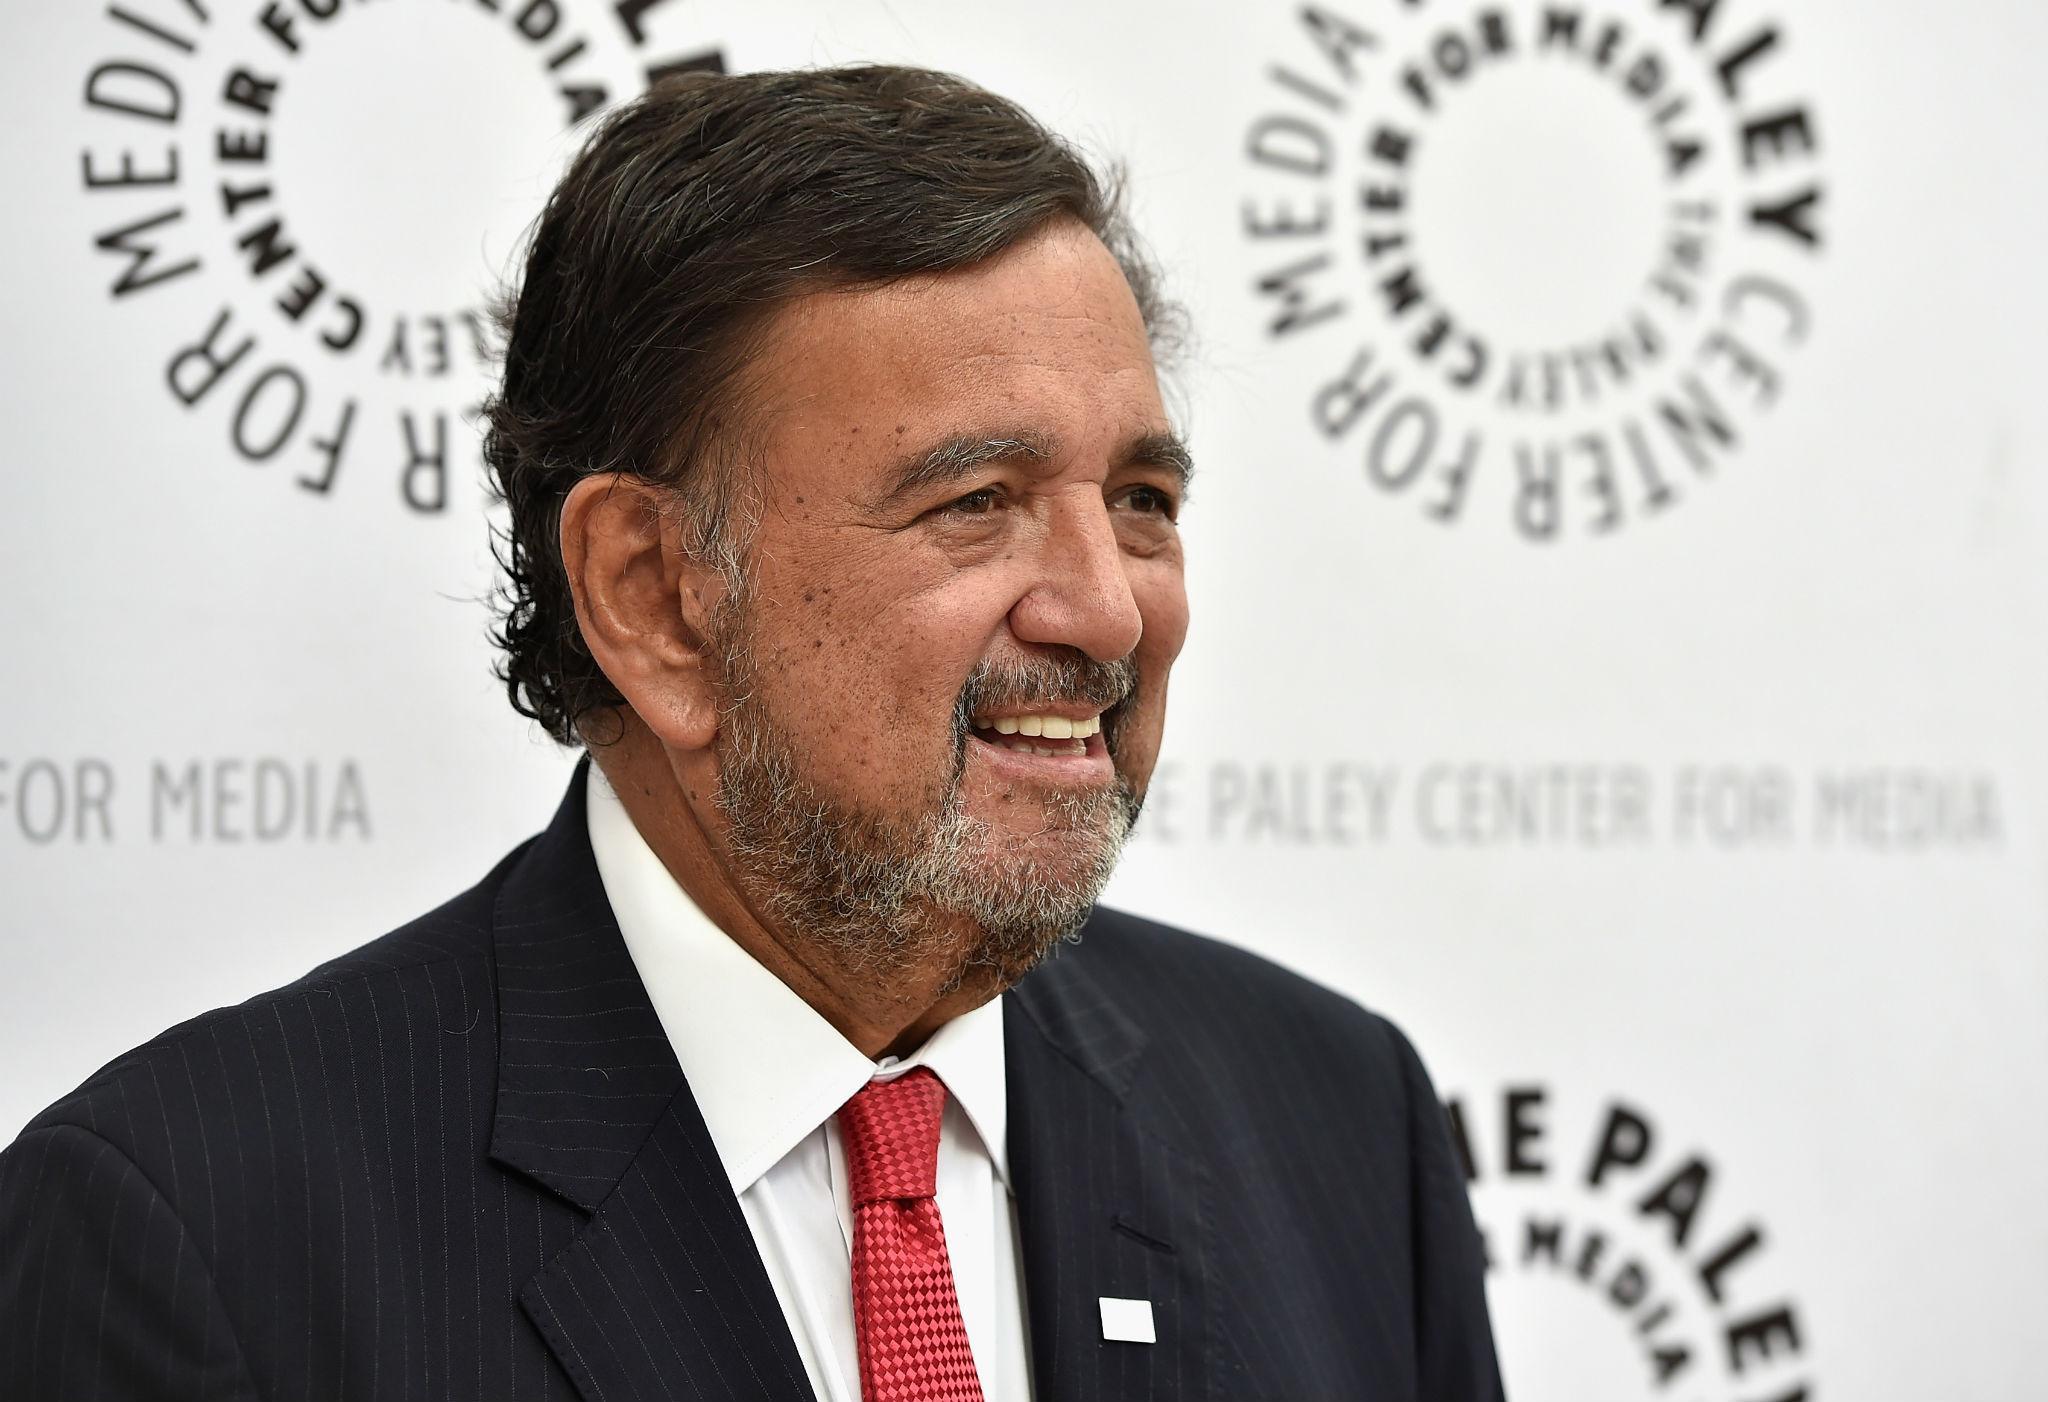 Former New Mexico governor Bill Richardson resigned from a panel advising Myanmar's government on the Rohingya refugee crisis.